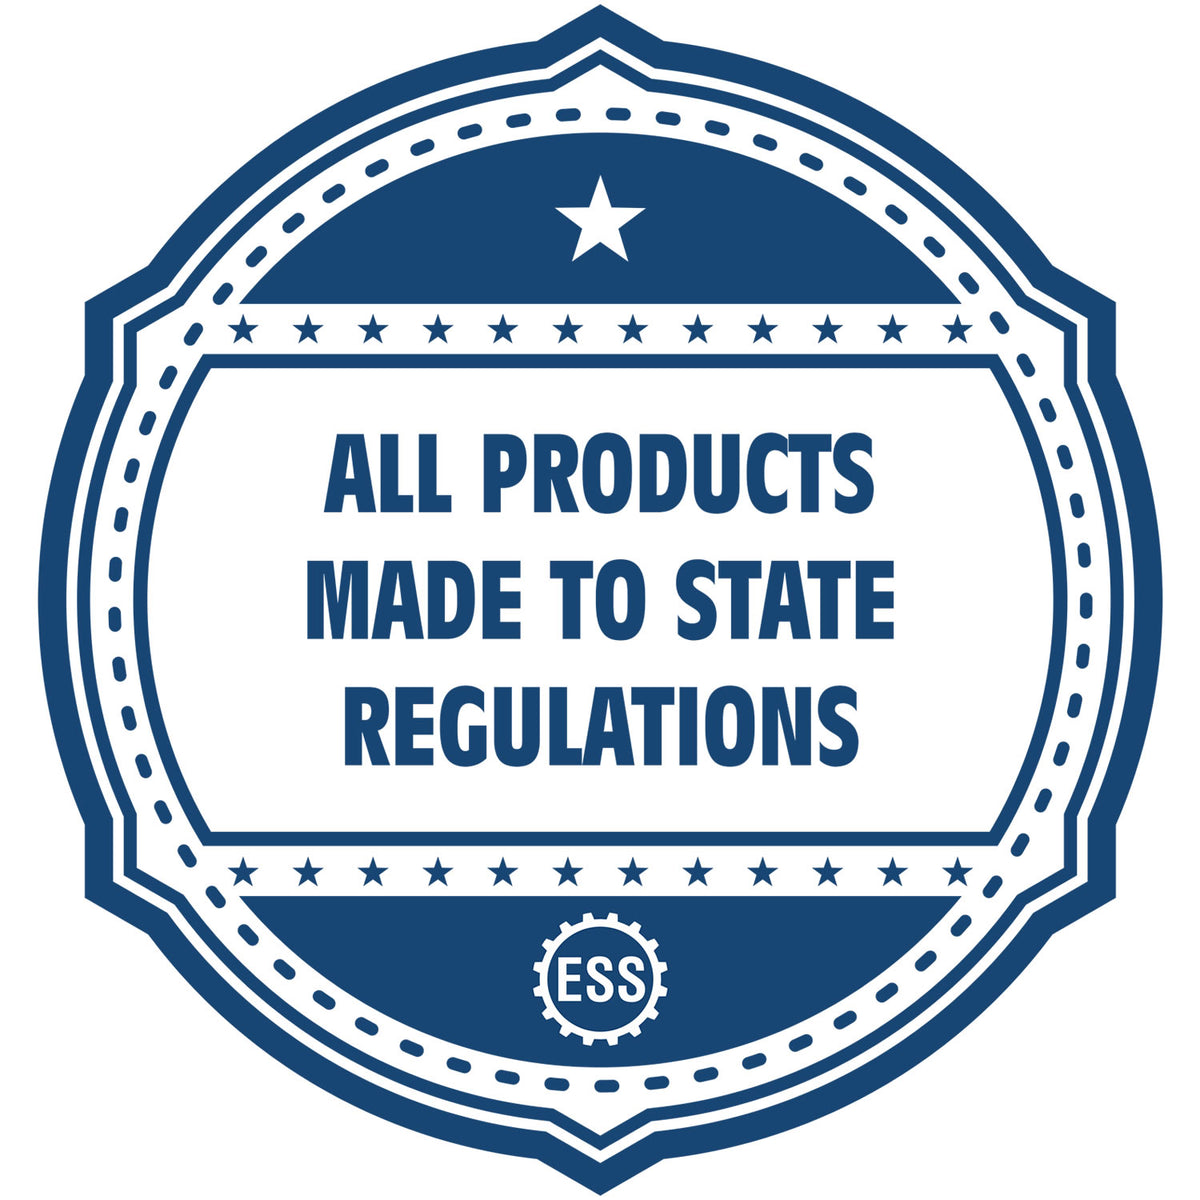 An icon or badge element for the Soft Pocket Massachusetts Landscape Architect Embosser showing that this product is made in compliance with state regulations.